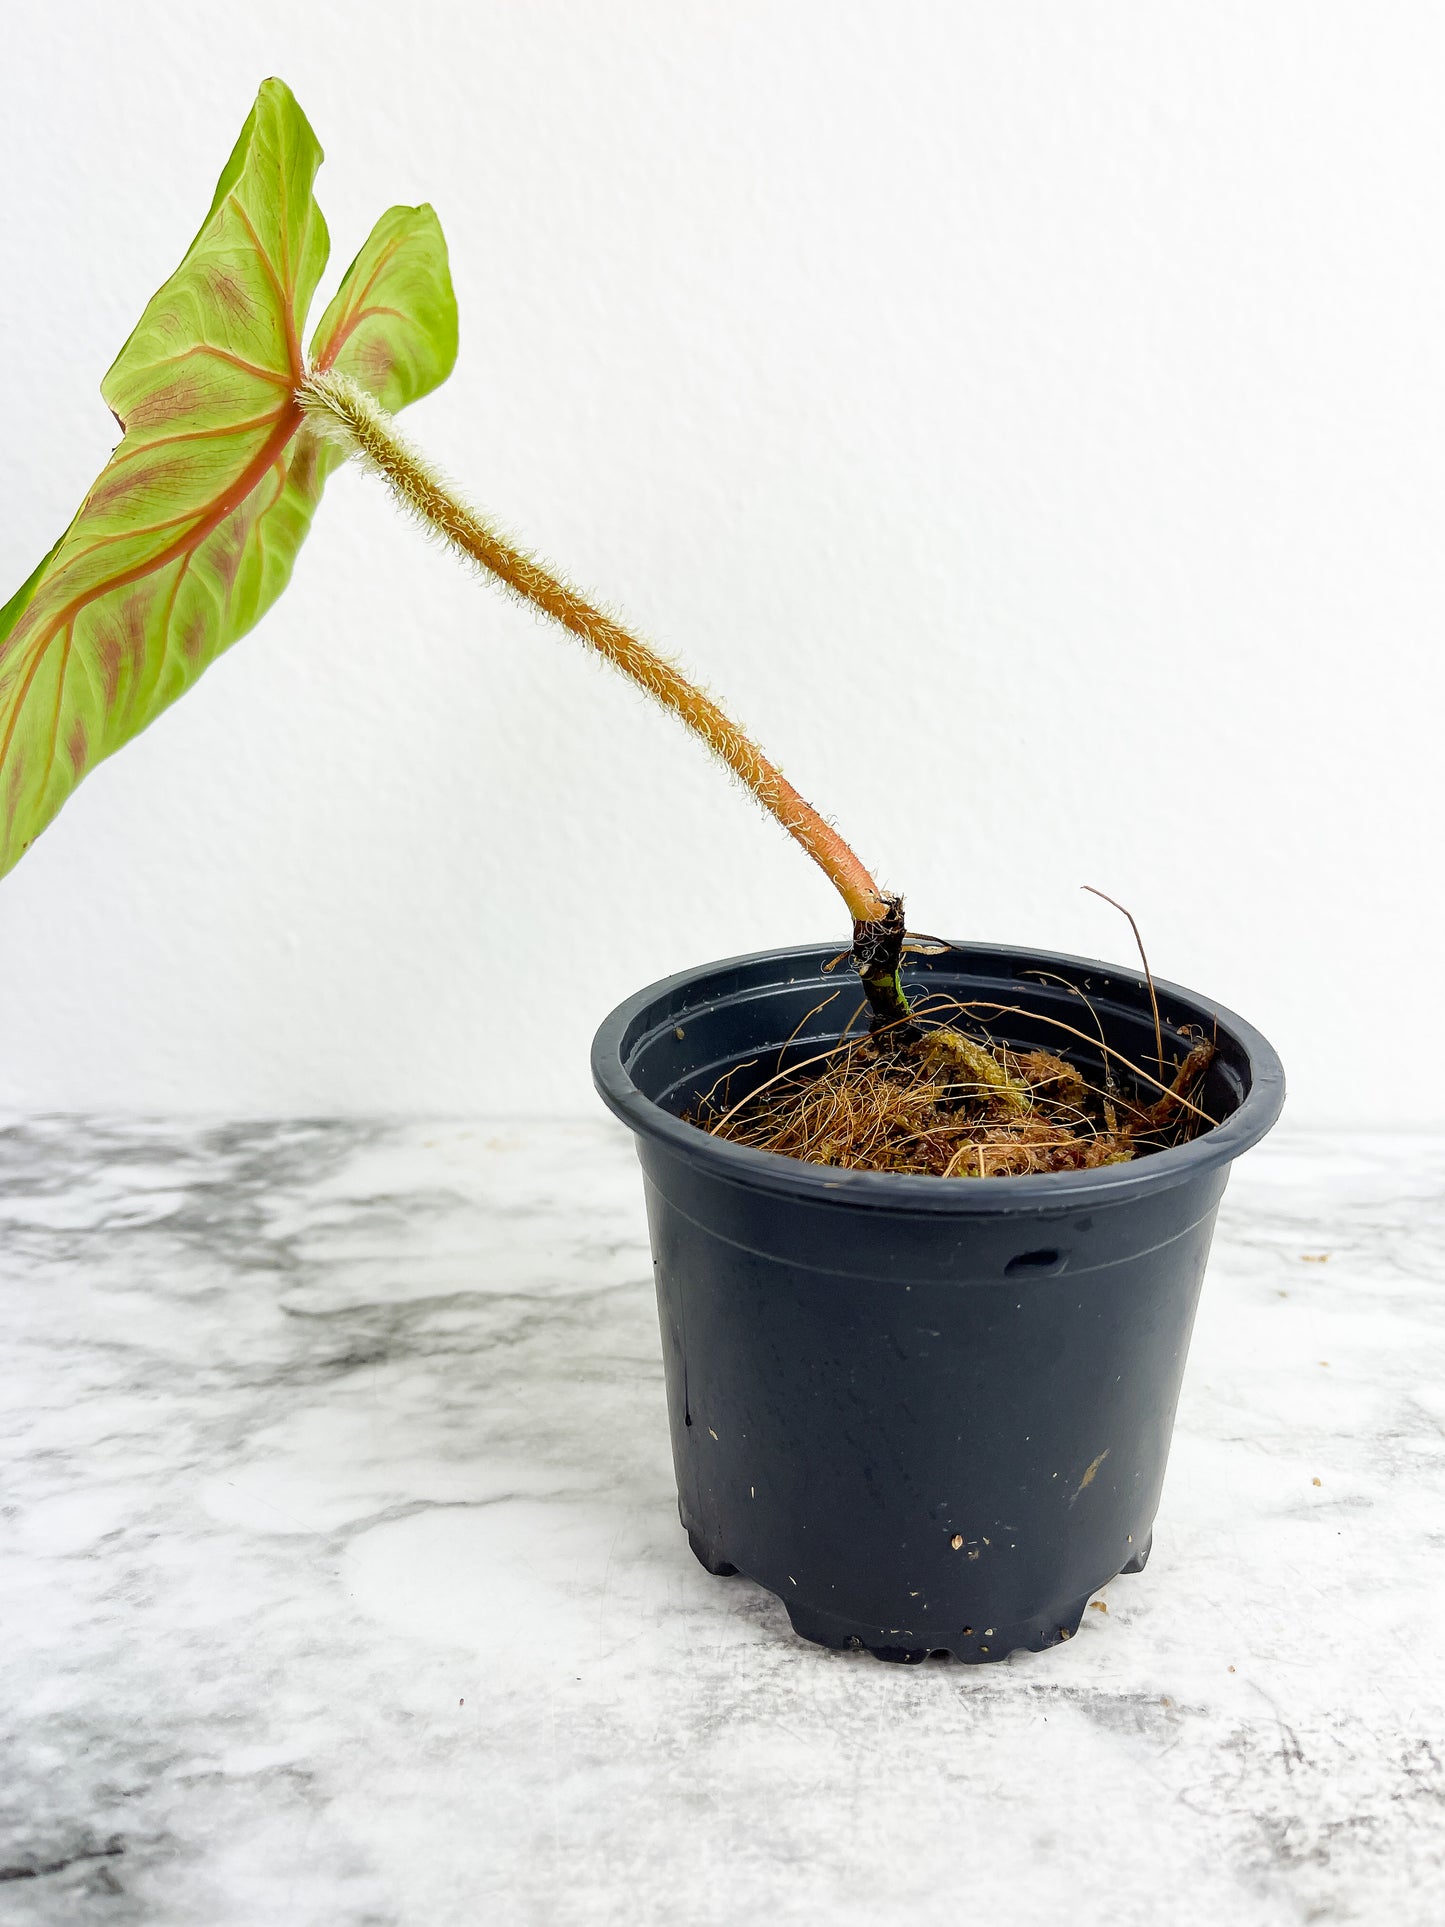 Philodendron verrucosum tambillo rooted 1 leaf and 1 sprout (Big leaf ~6")